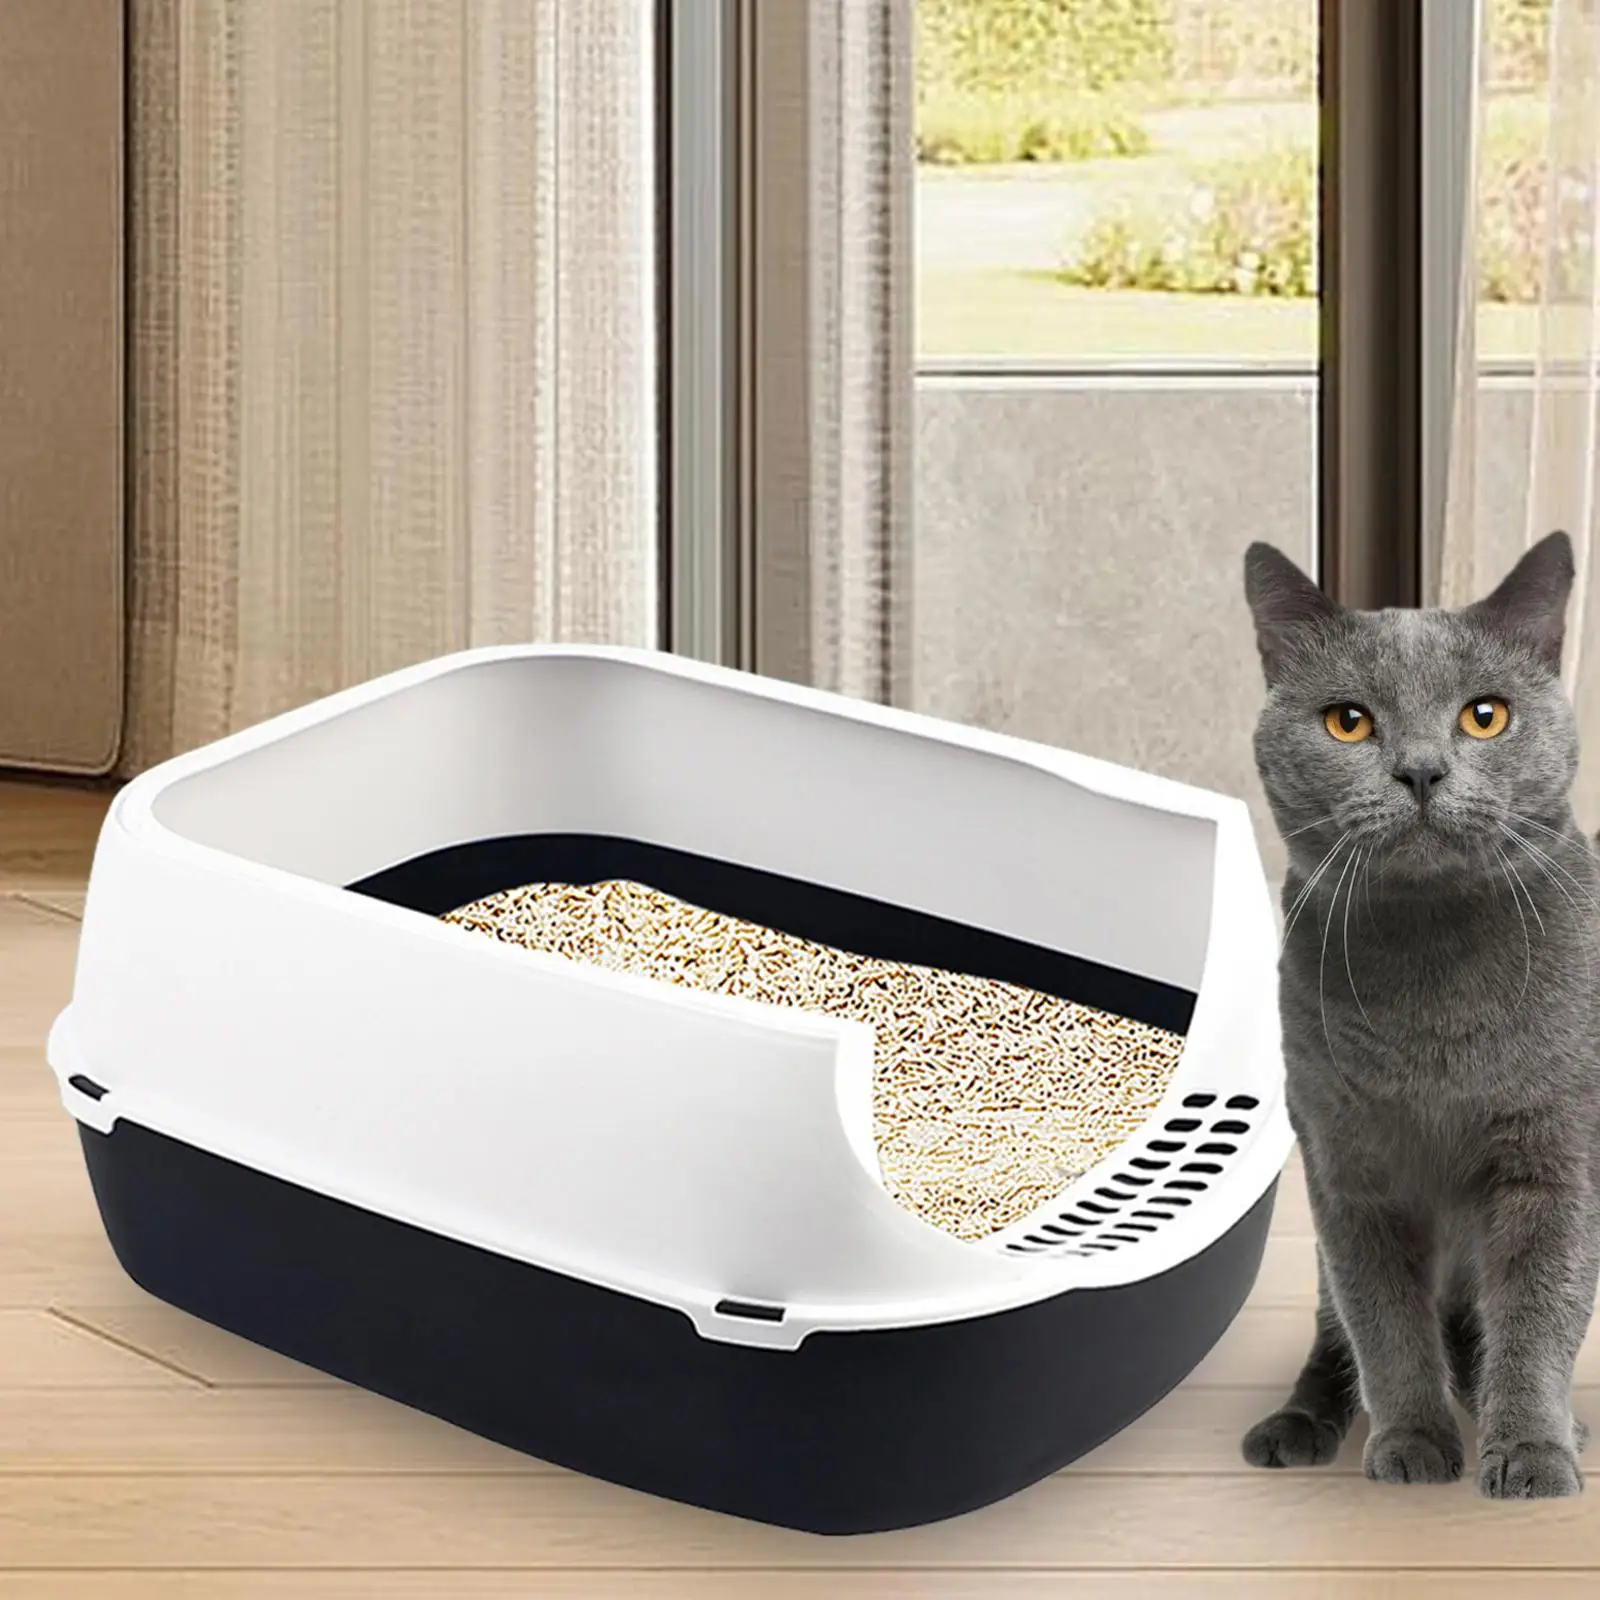 Cat , Kitten Potty Pan for Indoor Cats Easy to Clean and Assemble